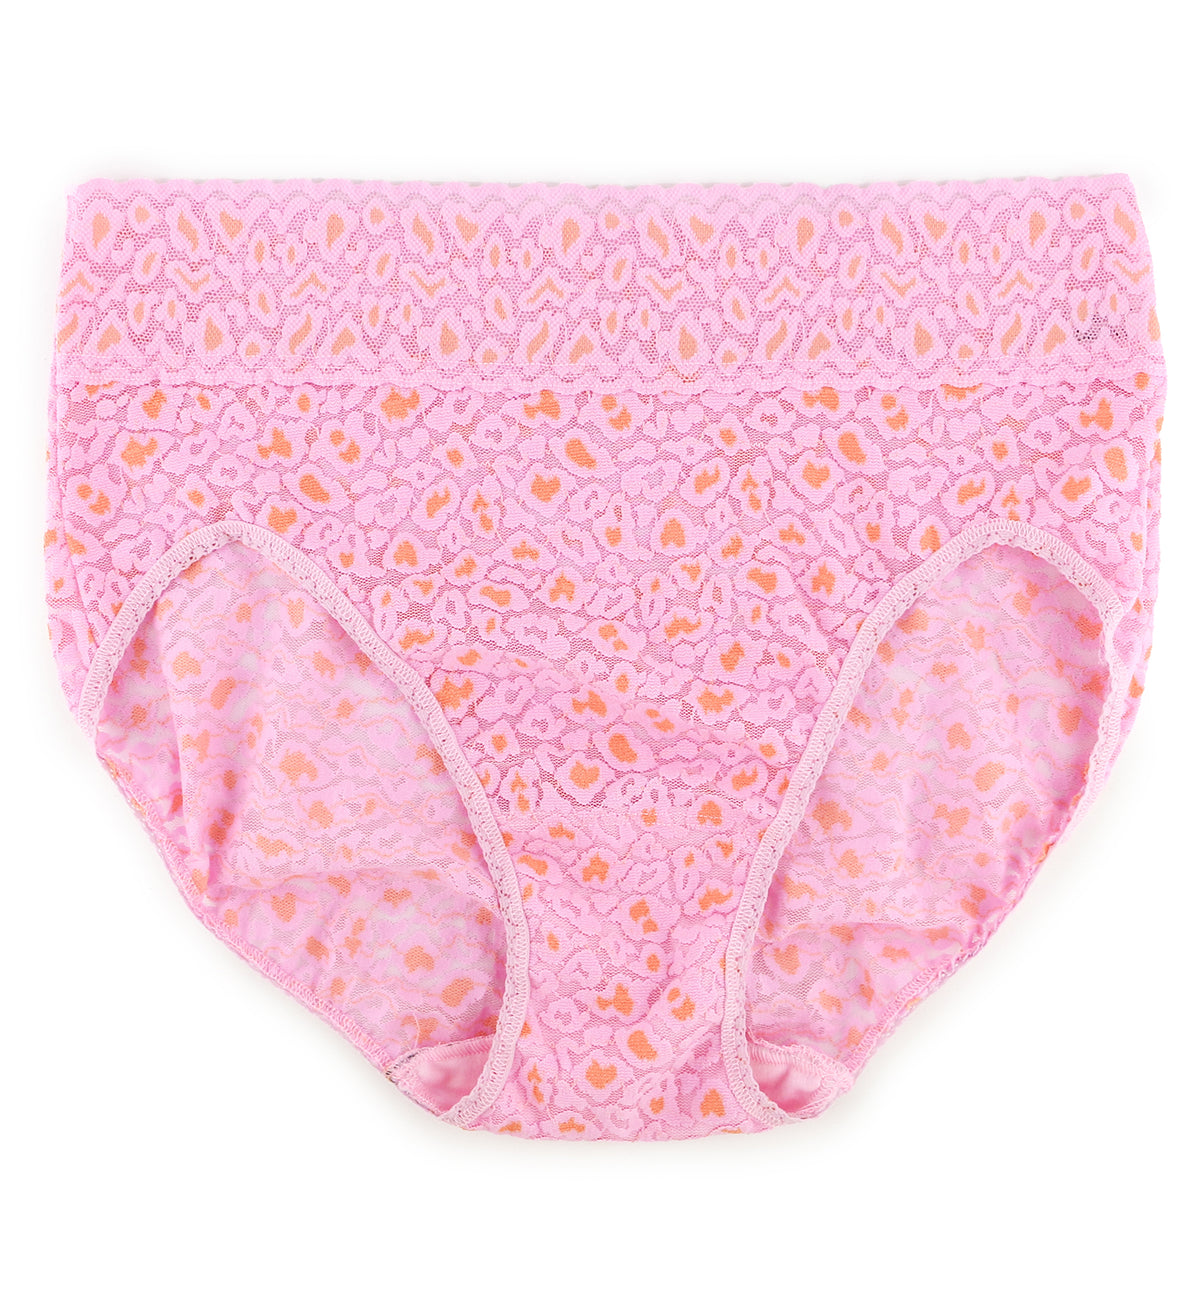 Hanky Panky Cross Dyed Leopard French Brief (7J2461),XS,Rose/Orange Blossom - Rose/Orange Blossom,XS